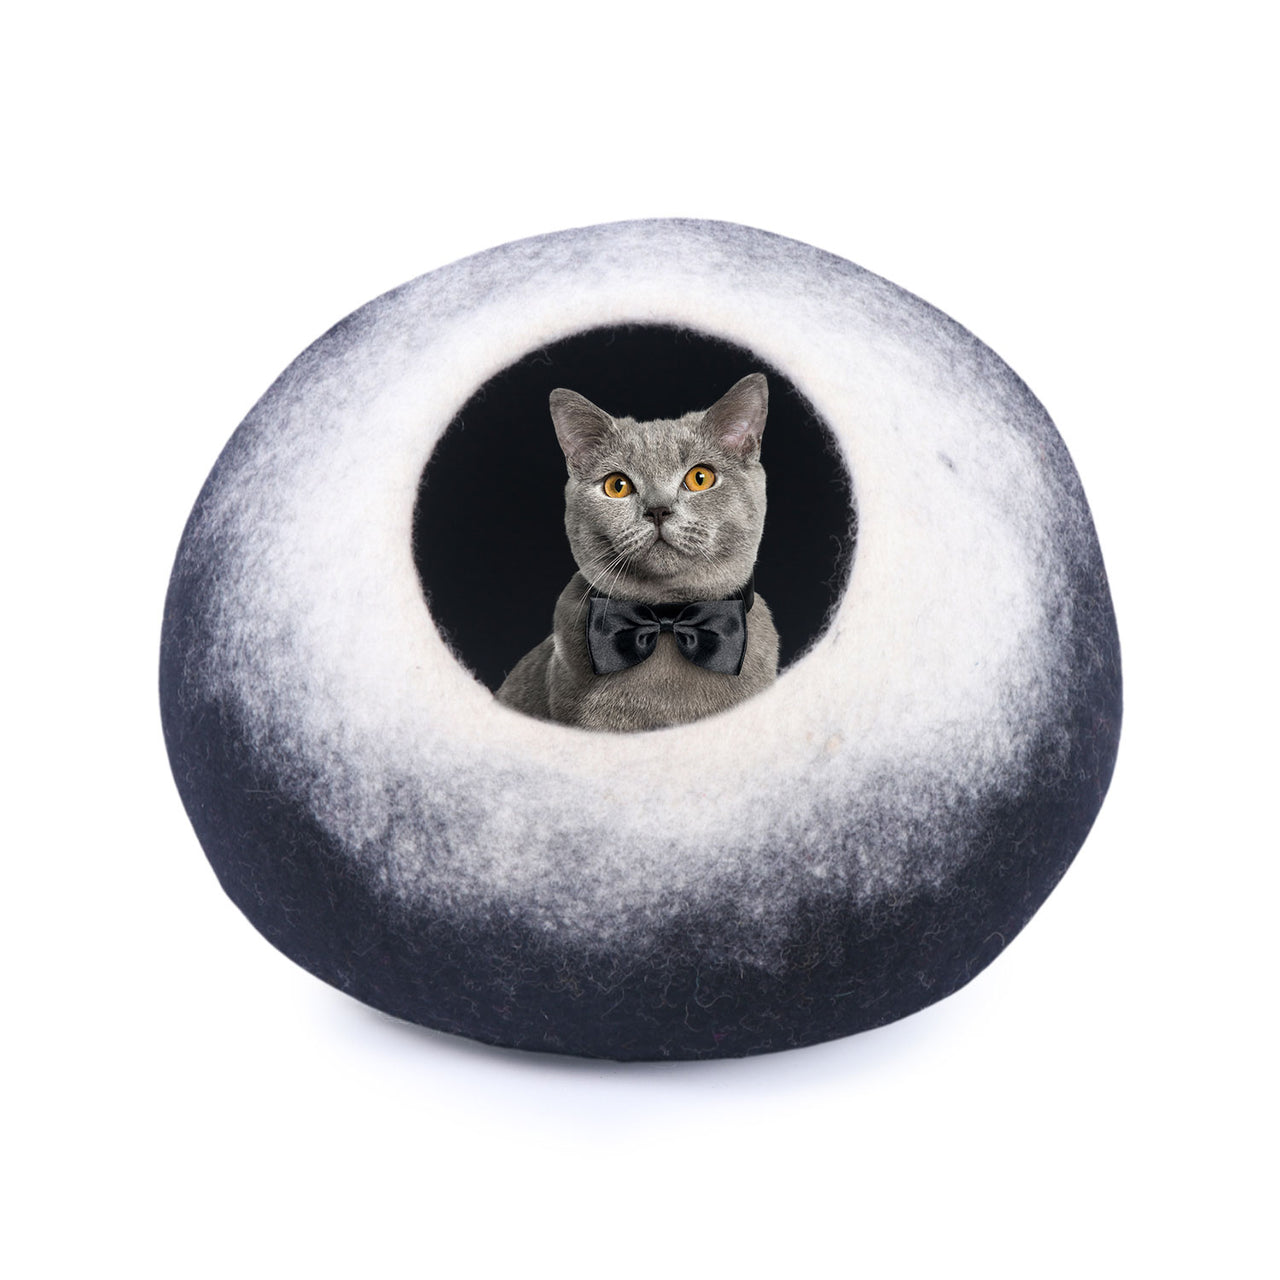 Feltcave Cat Cave Bed, Handmade from Wool, Enclosed Cat Bed, Cat Pod, Cat Dome Nest Hiding Place, Cozy Hideout Cat Igloo Pod for Indoor Cats